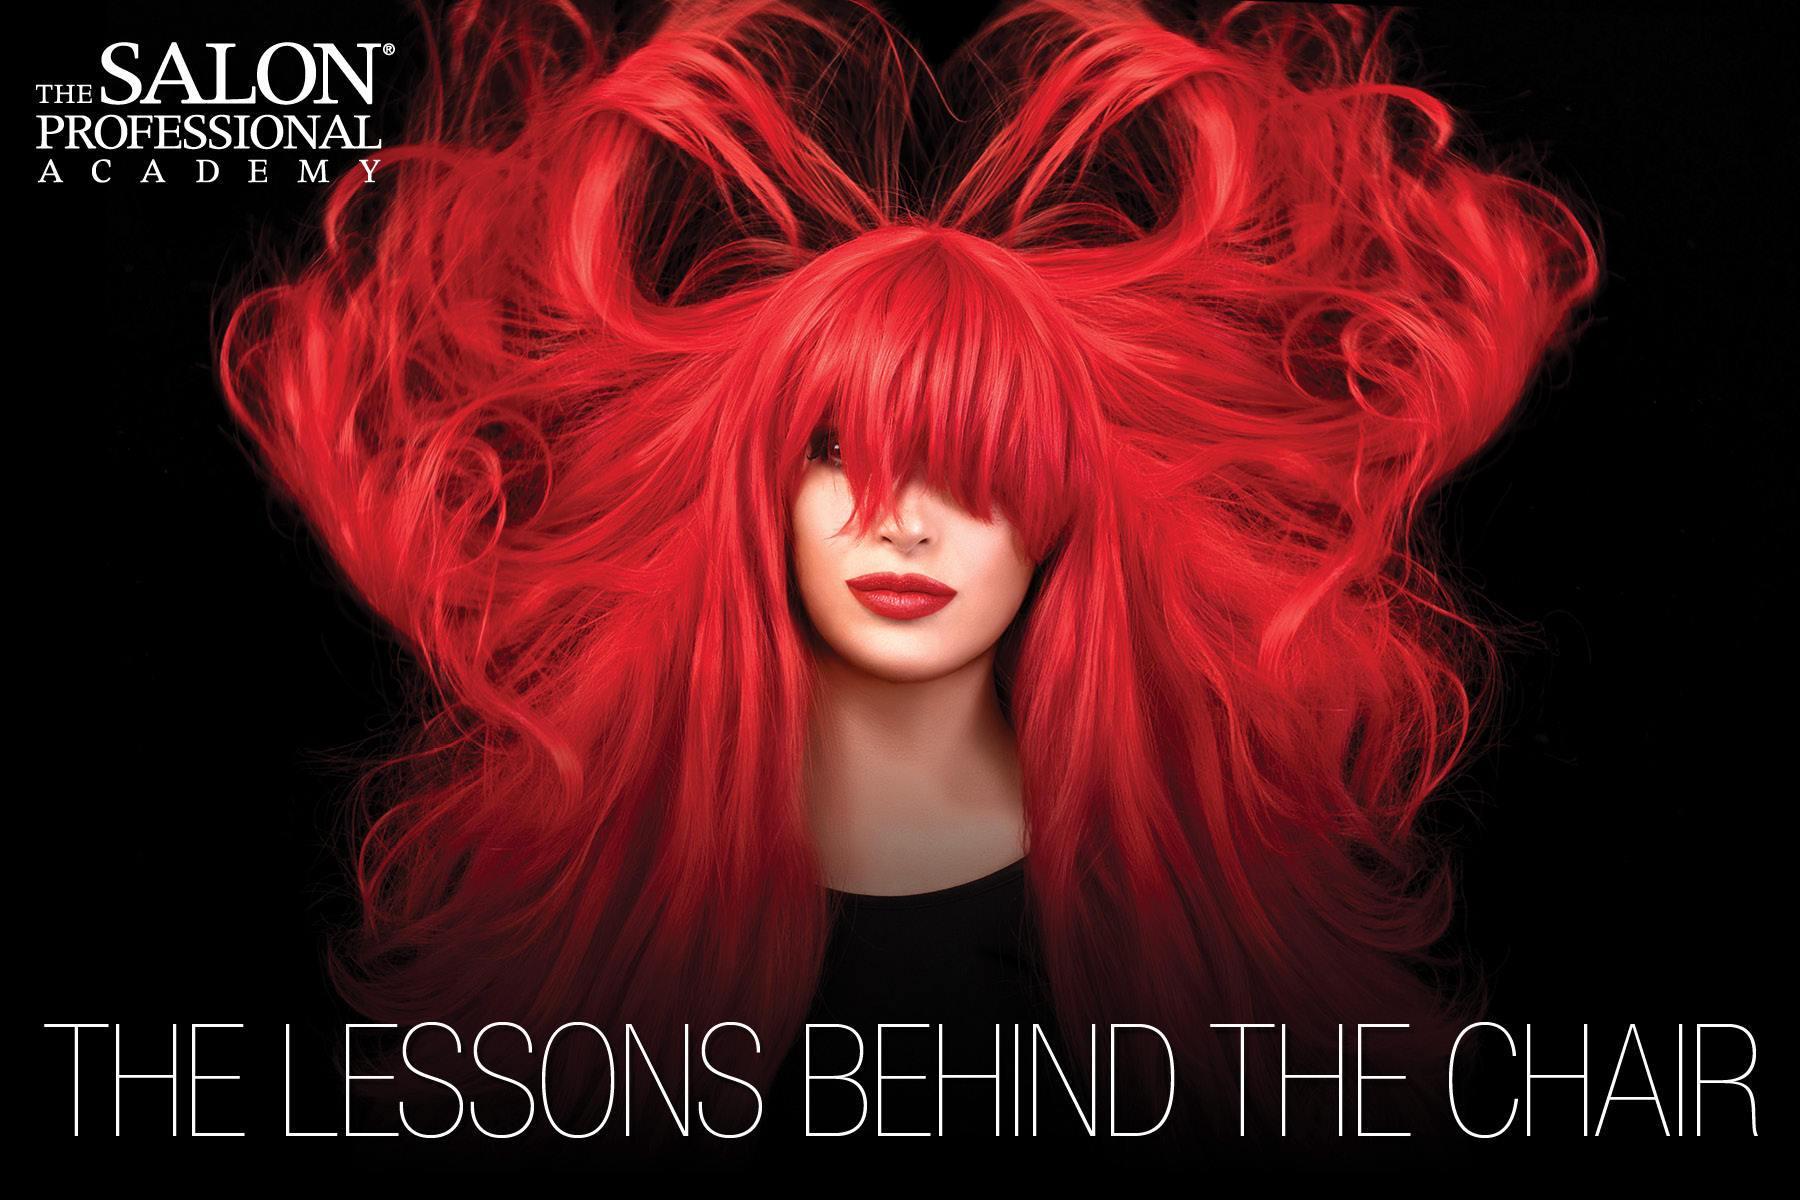 There are certain steps to take if you want to become a hair colorist. Learn how and the lessons behind the career here.